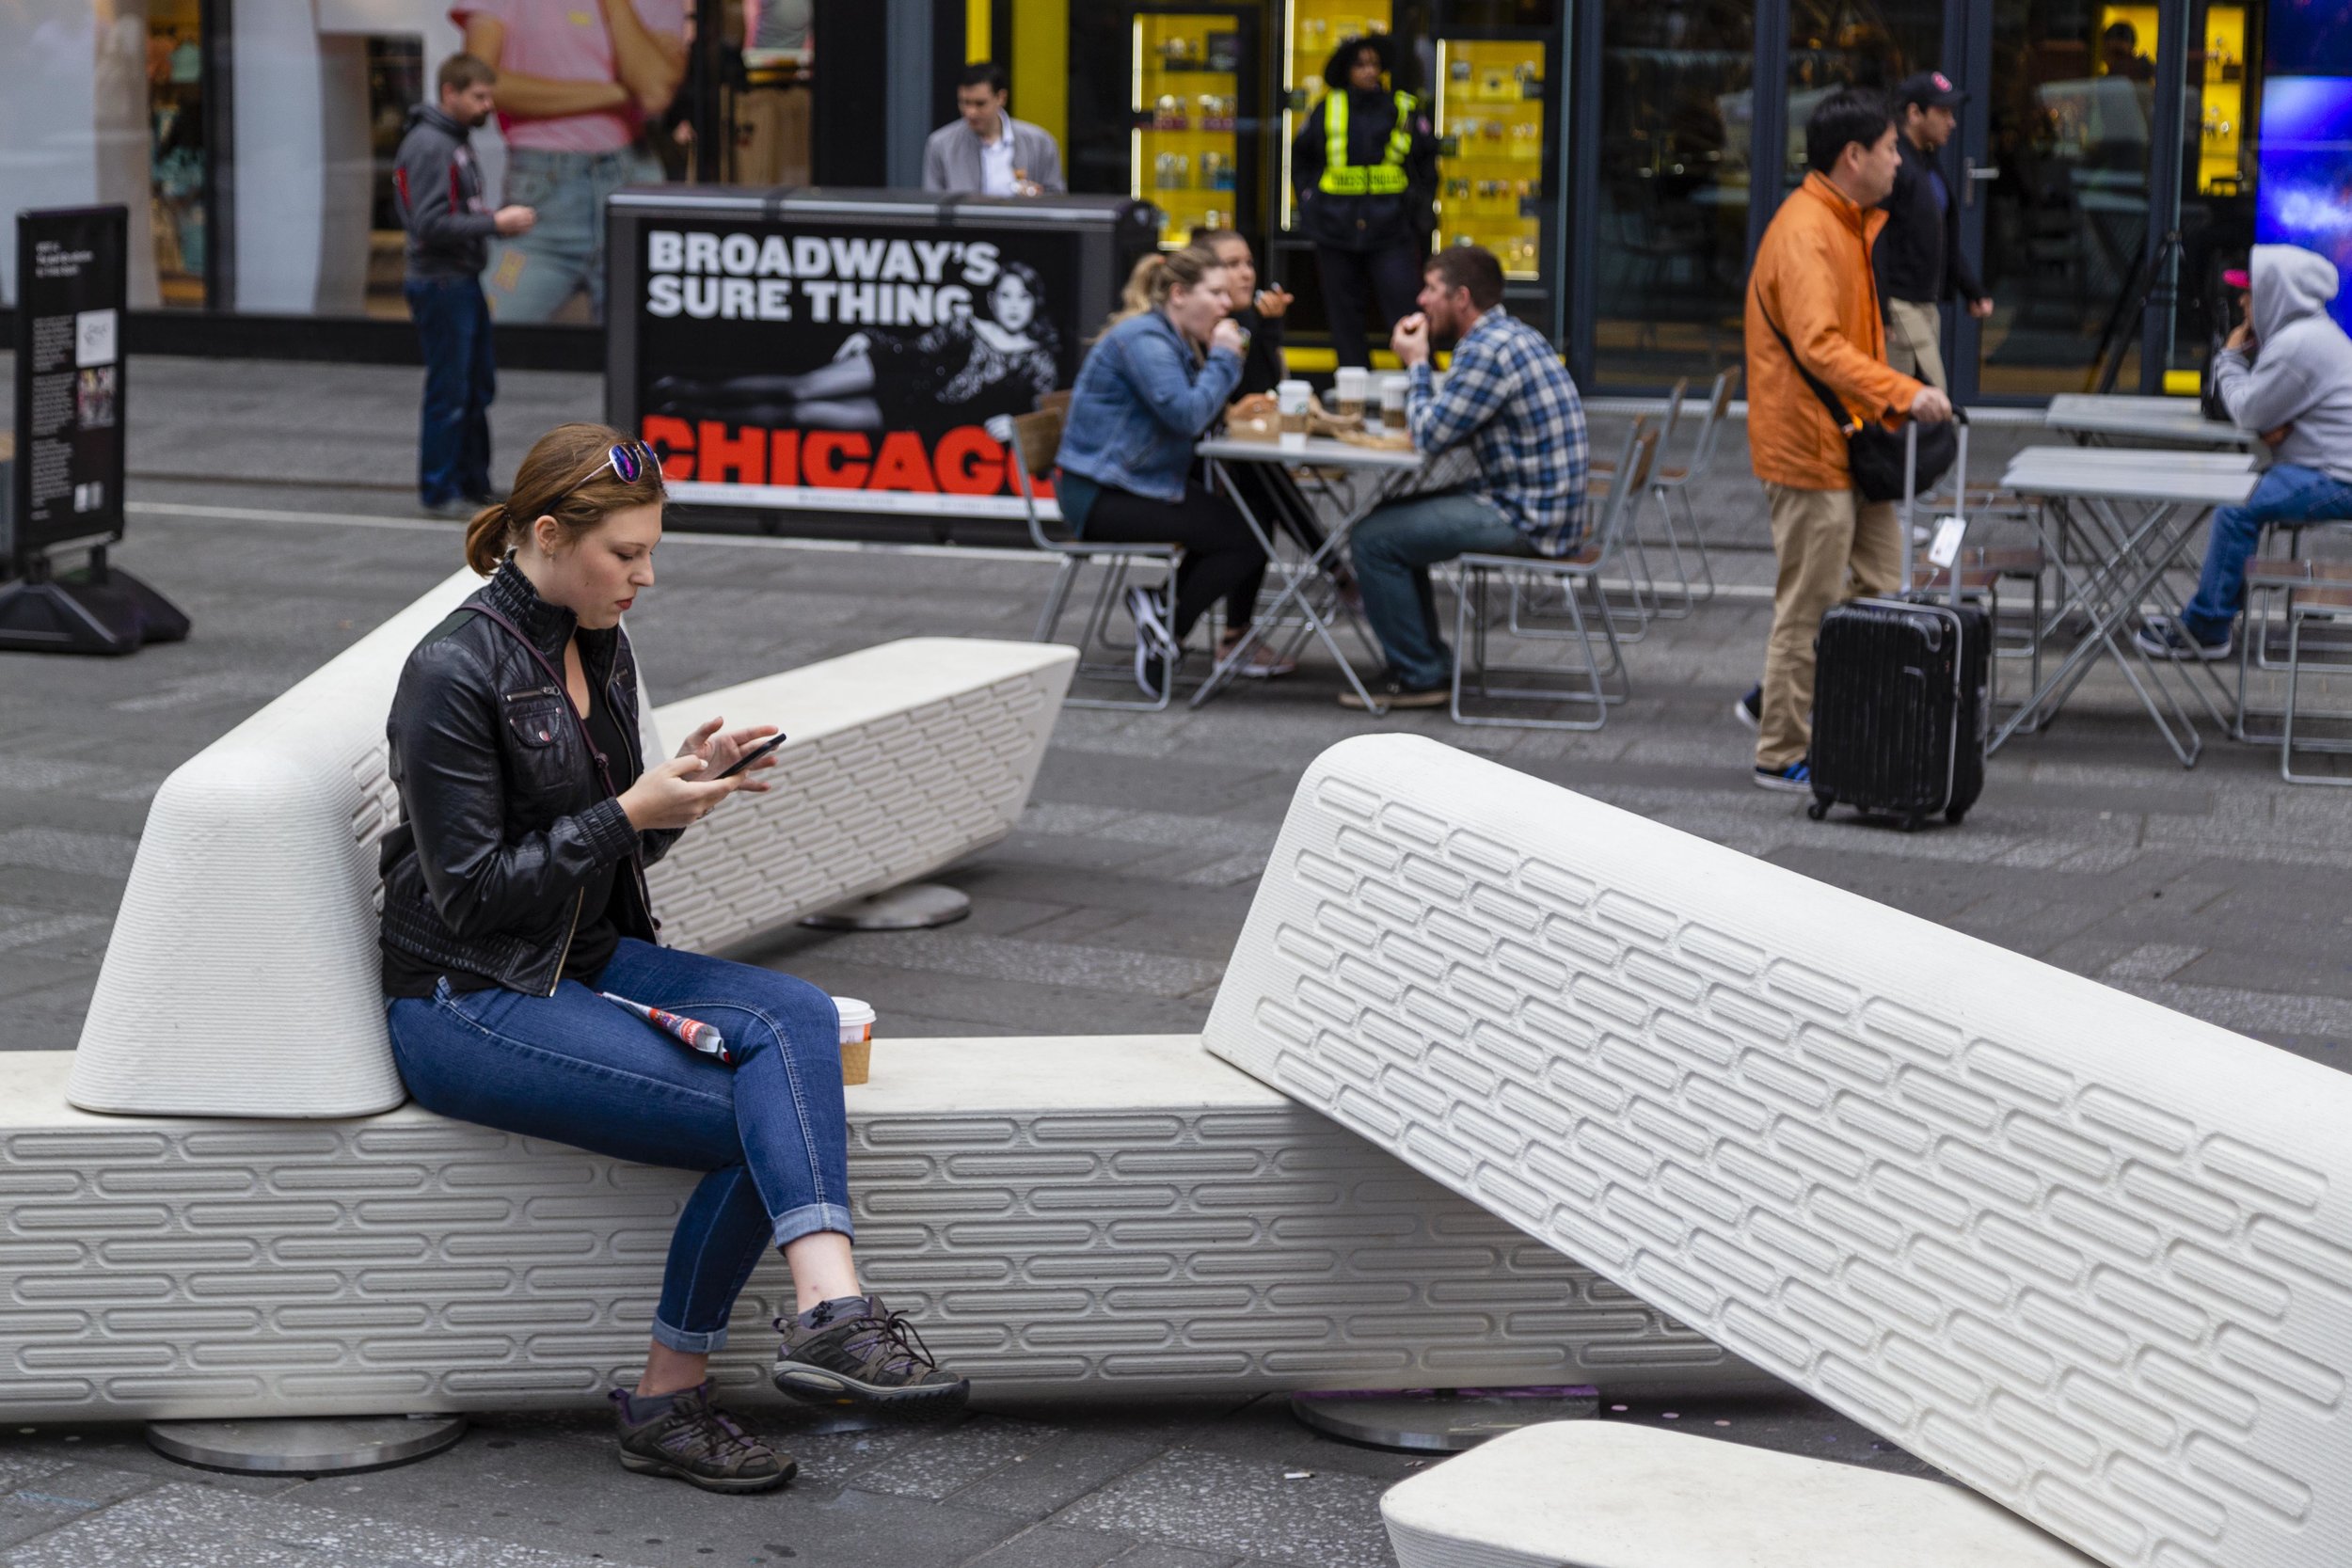 New 3D-printed, crash-proof benches debut in Times Square